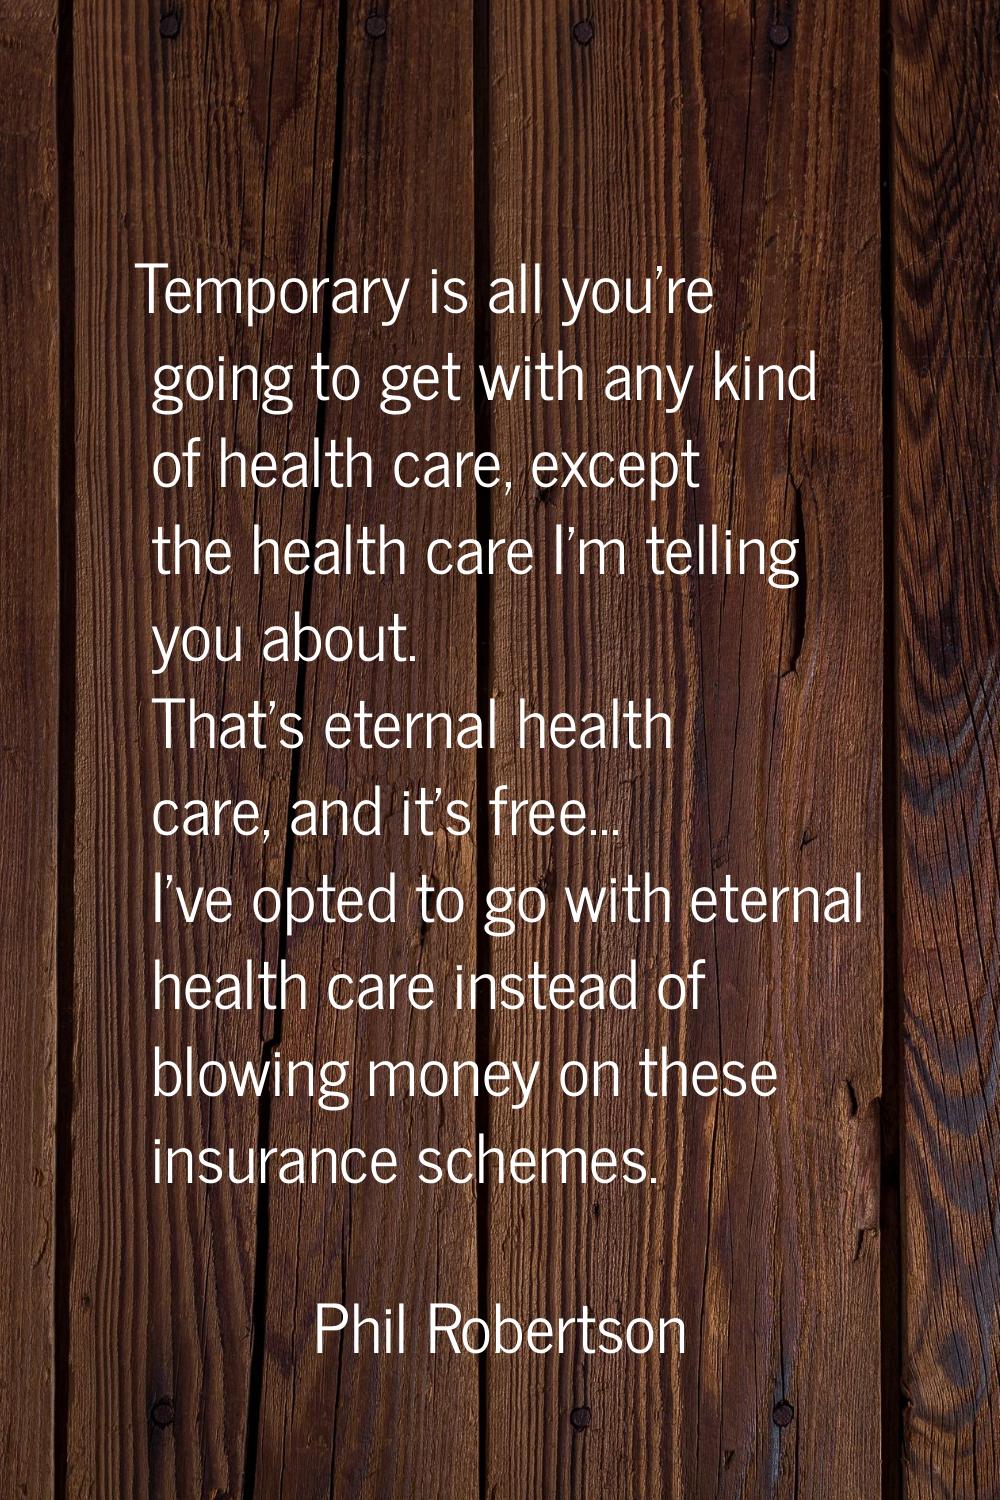 Temporary is all you're going to get with any kind of health care, except the health care I'm telli